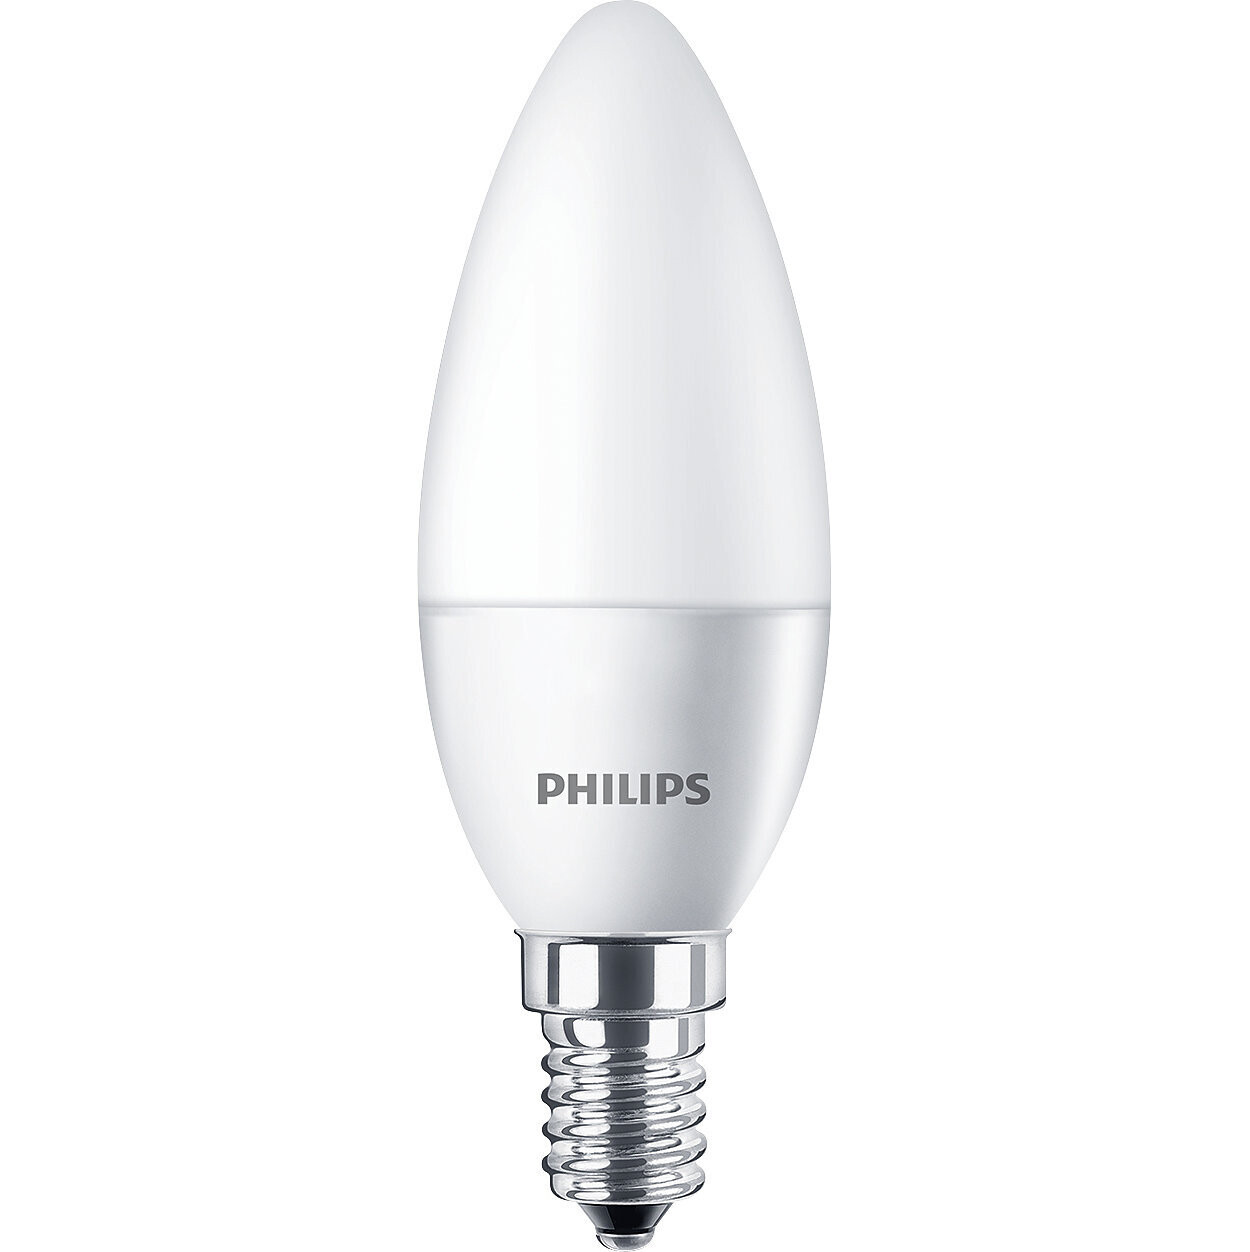 Philips 5.5W B22 Dimmable LED Candle Bulb (Frosted, Warm White)